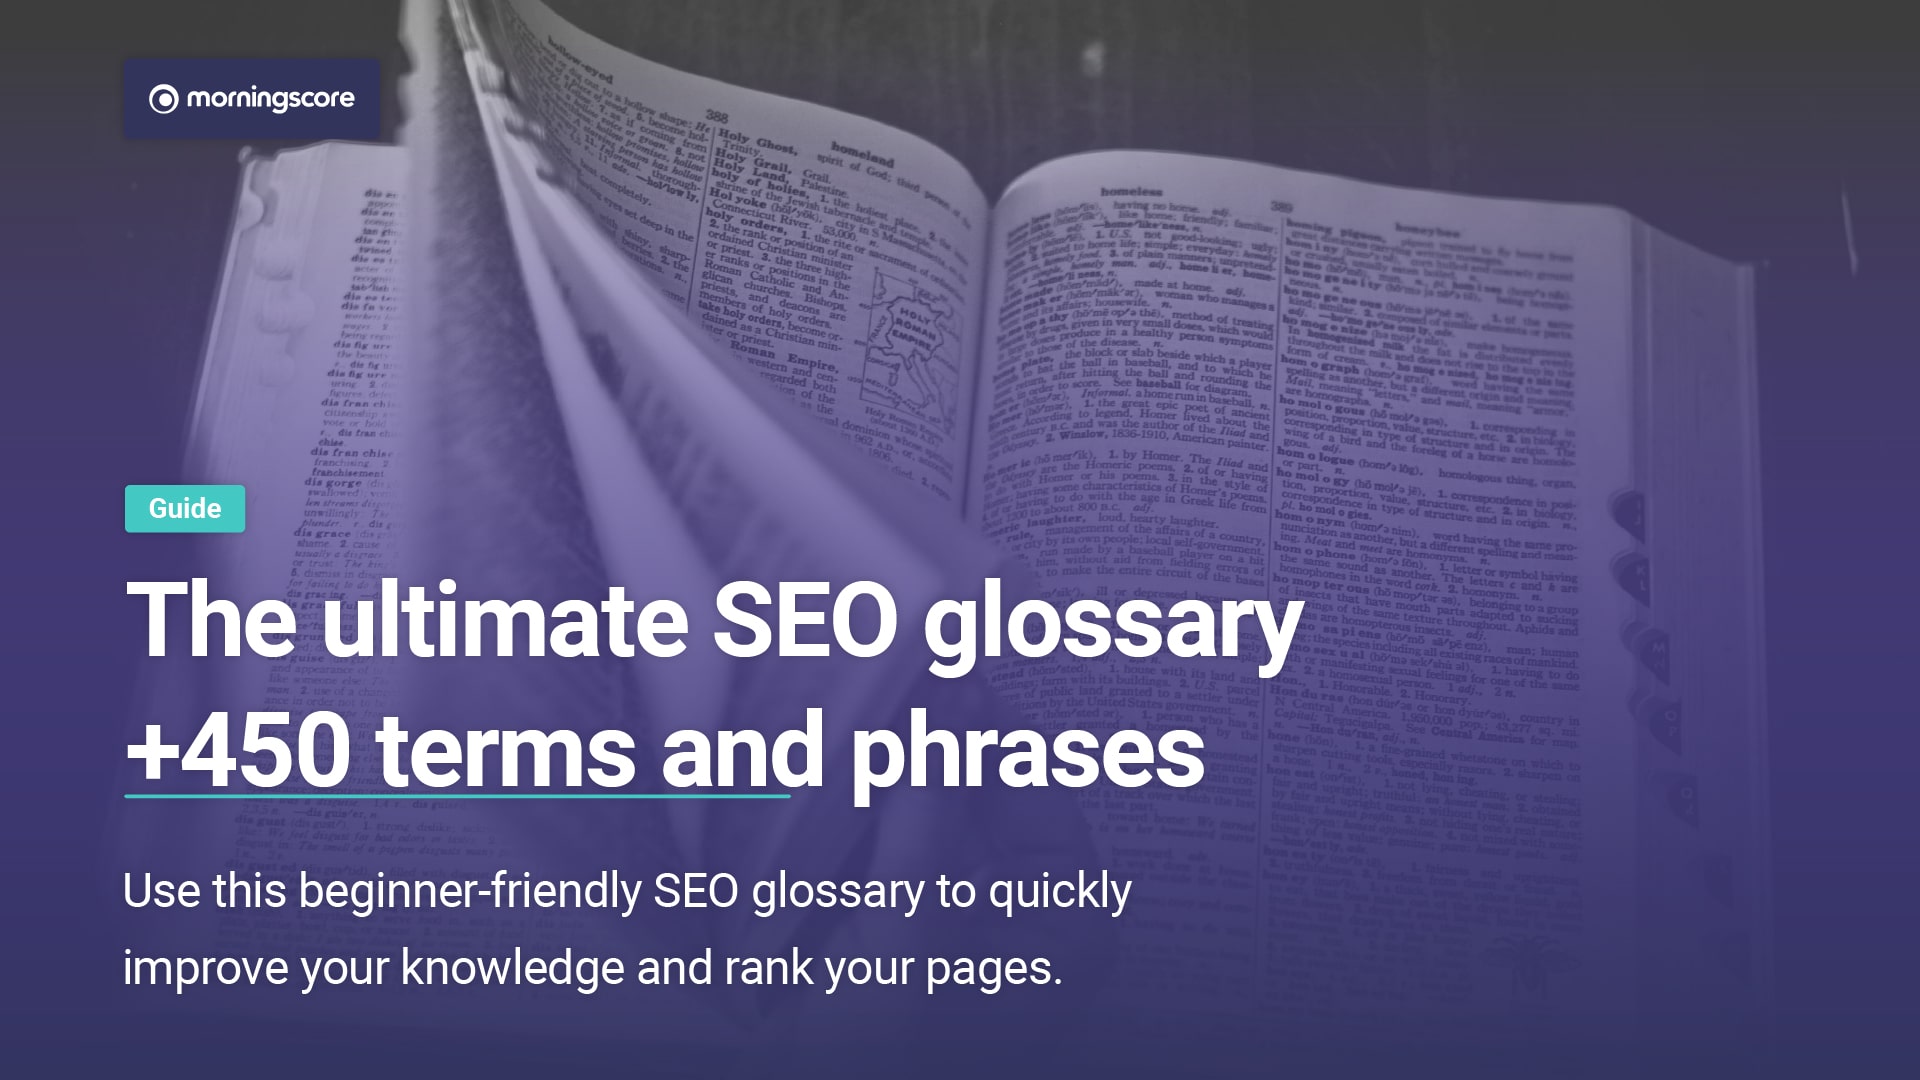 SEO glossary by Morningscore - all search engine optimization terms in the biggest seo dictionary